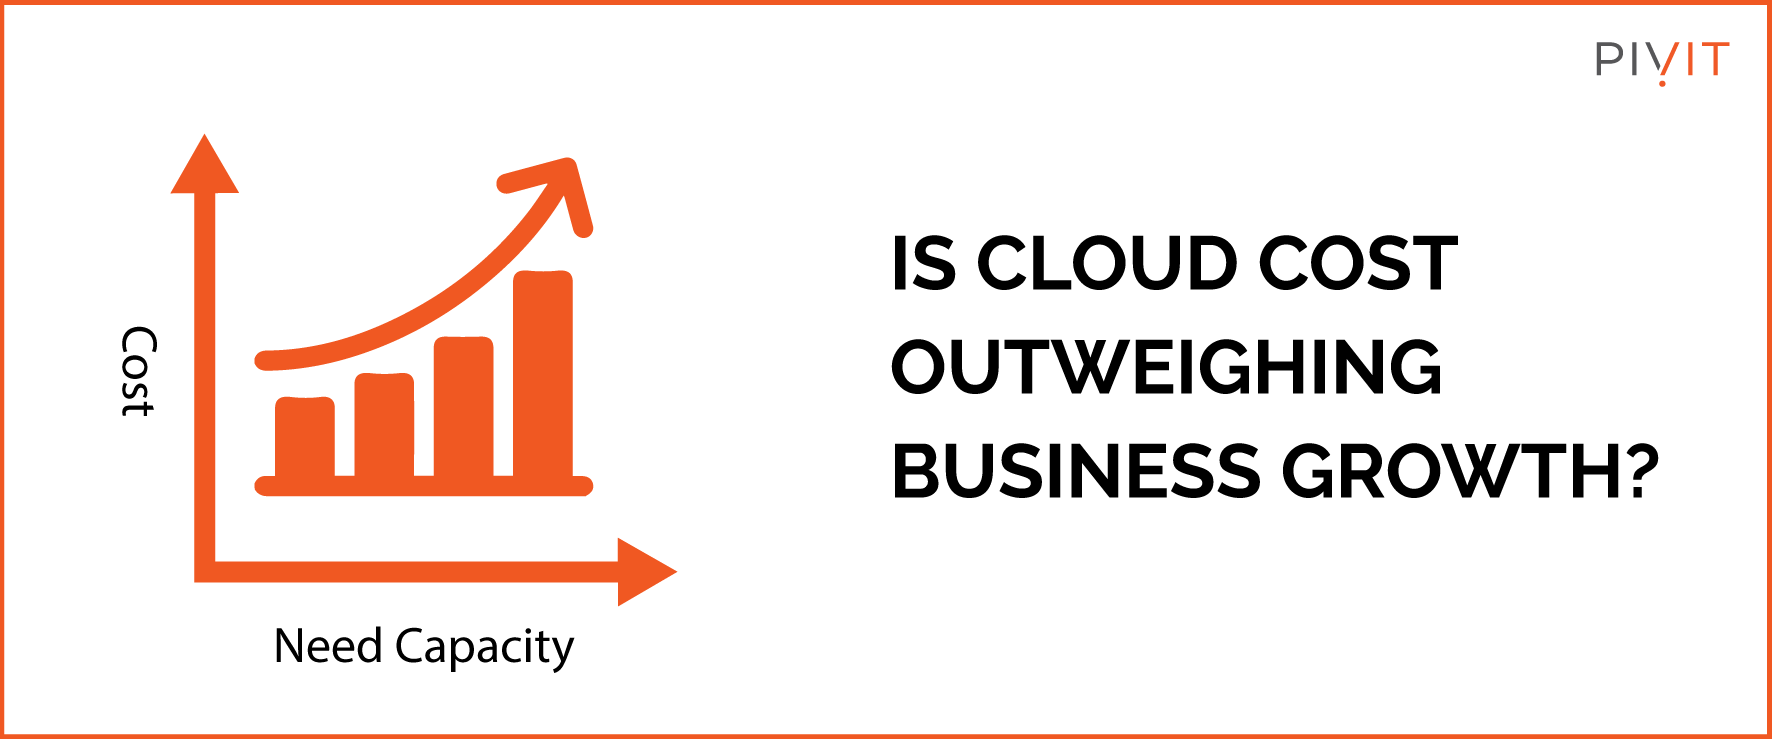 Is cloud cost outweighing business growth